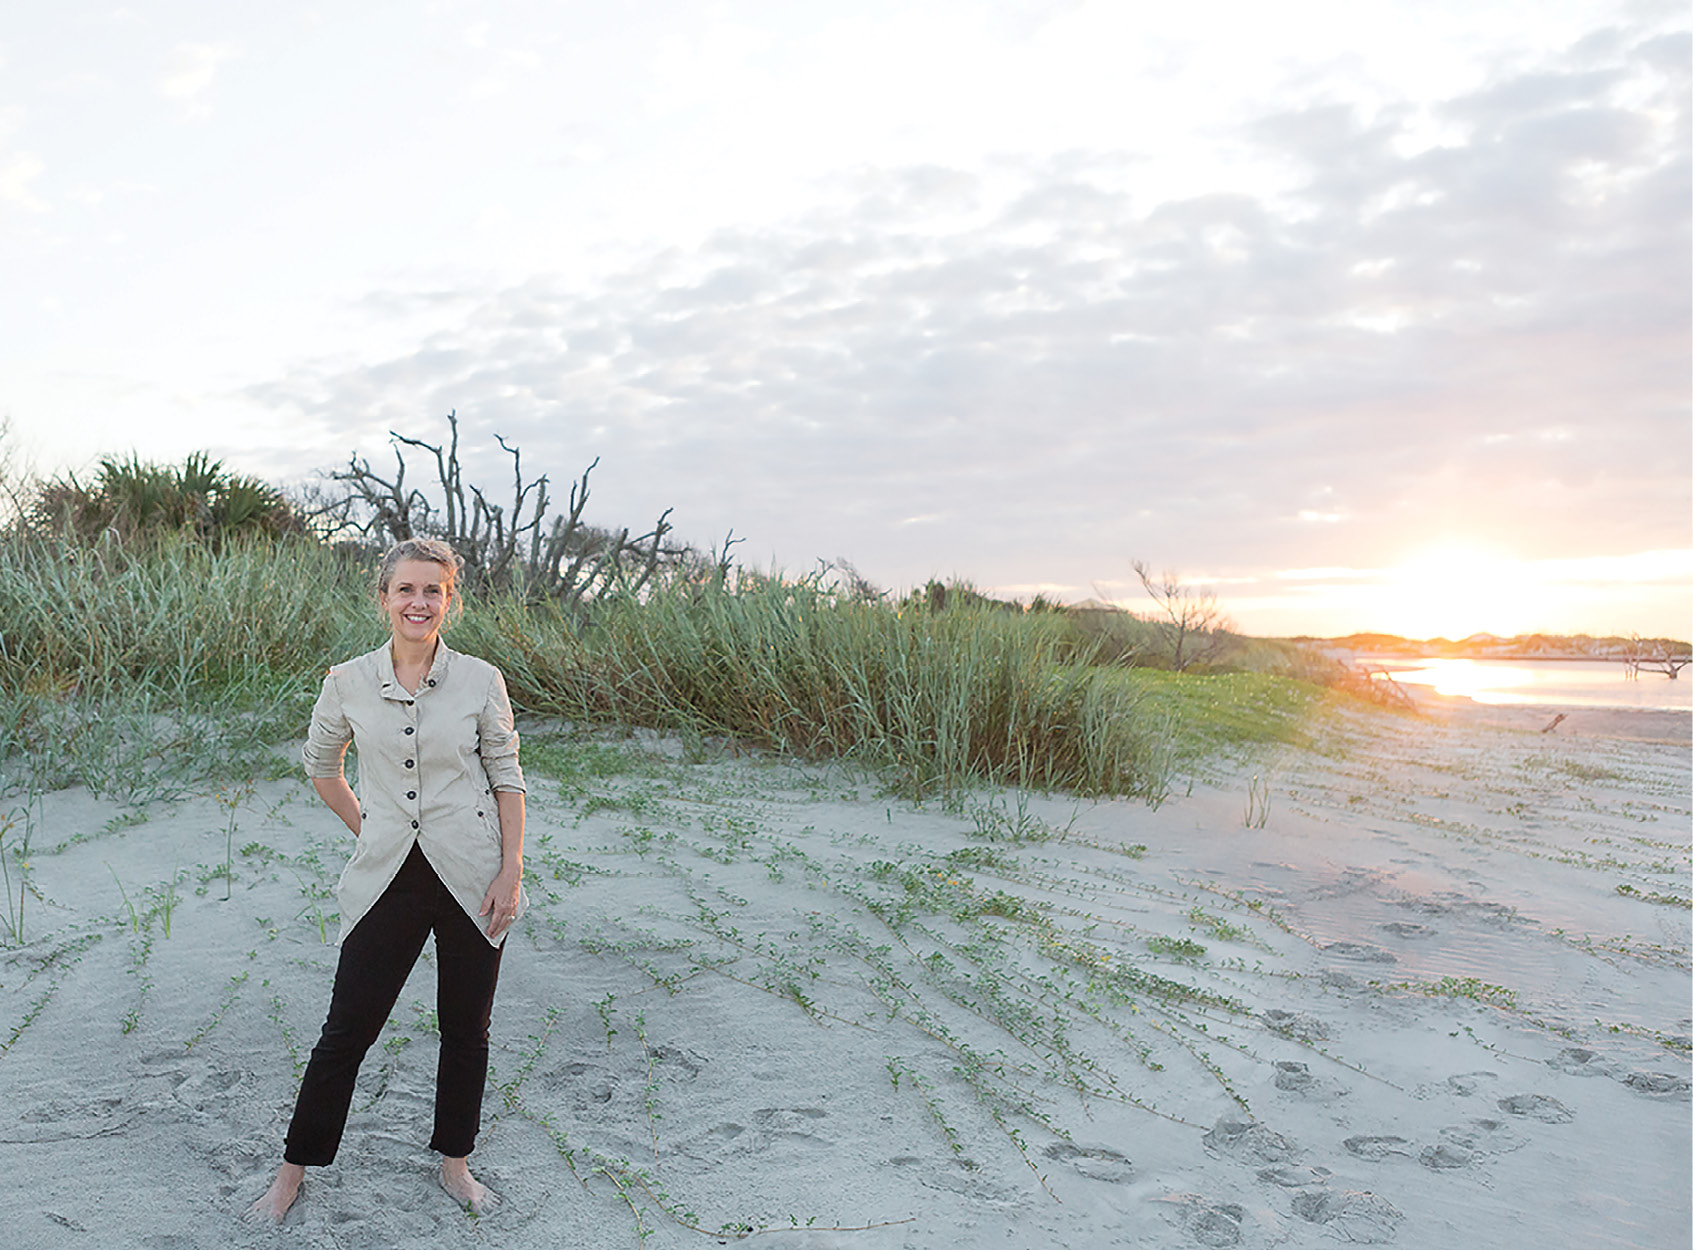 From fighting sprawl to advocating for improved transportation and supporting local agriculture, the Coastal Conservation League counts a healthy quality of life as an integral part of its mission. “We see people as part of the ecosystem,” says executive director Laura Cantral